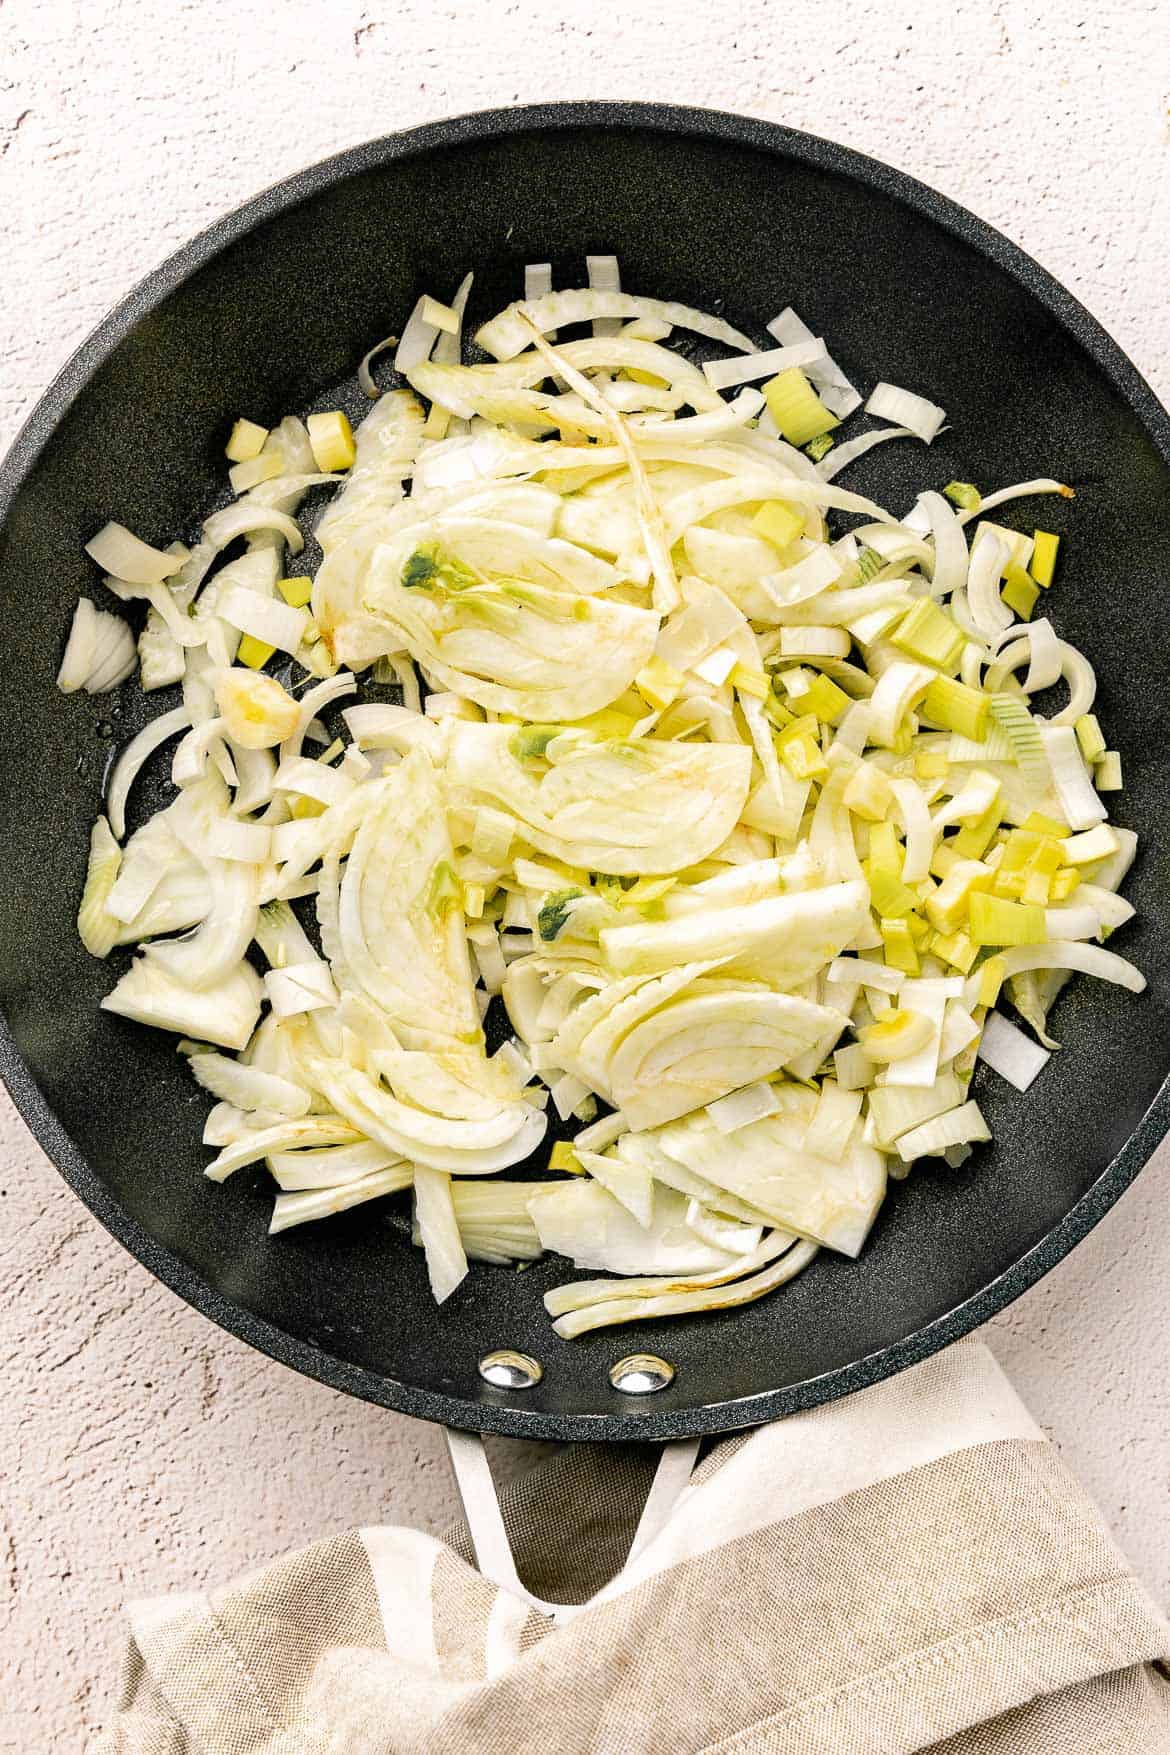 Fennel and leeks in a pan.